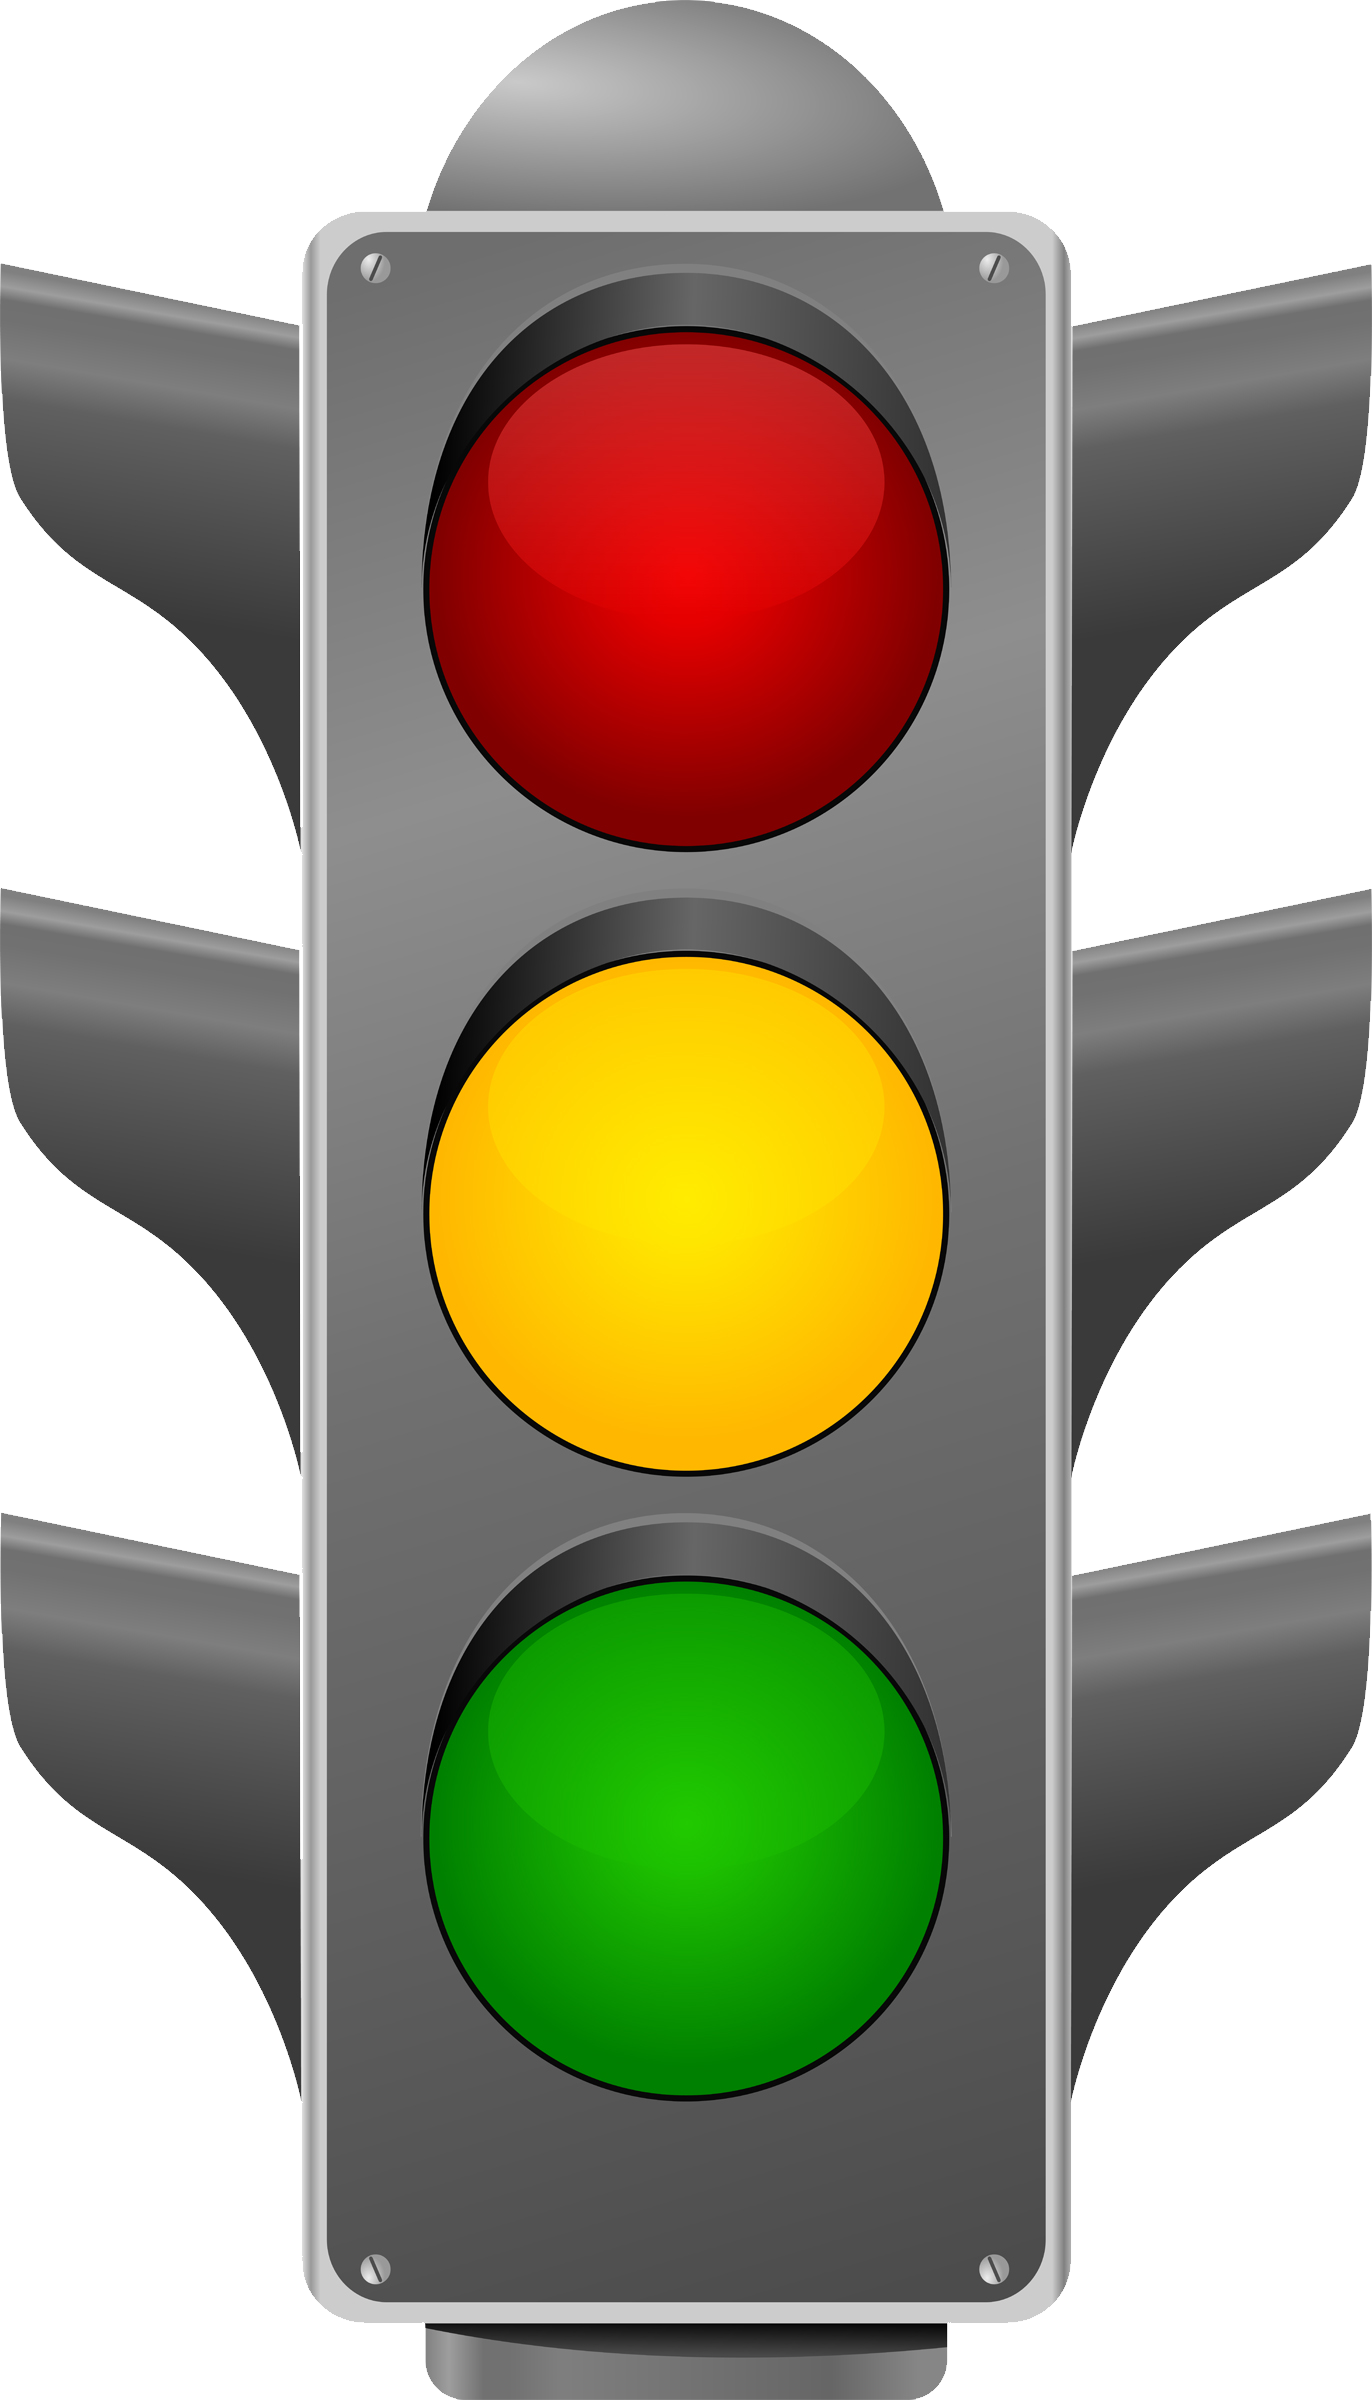 Lights clipart yellow. Traffic light png image